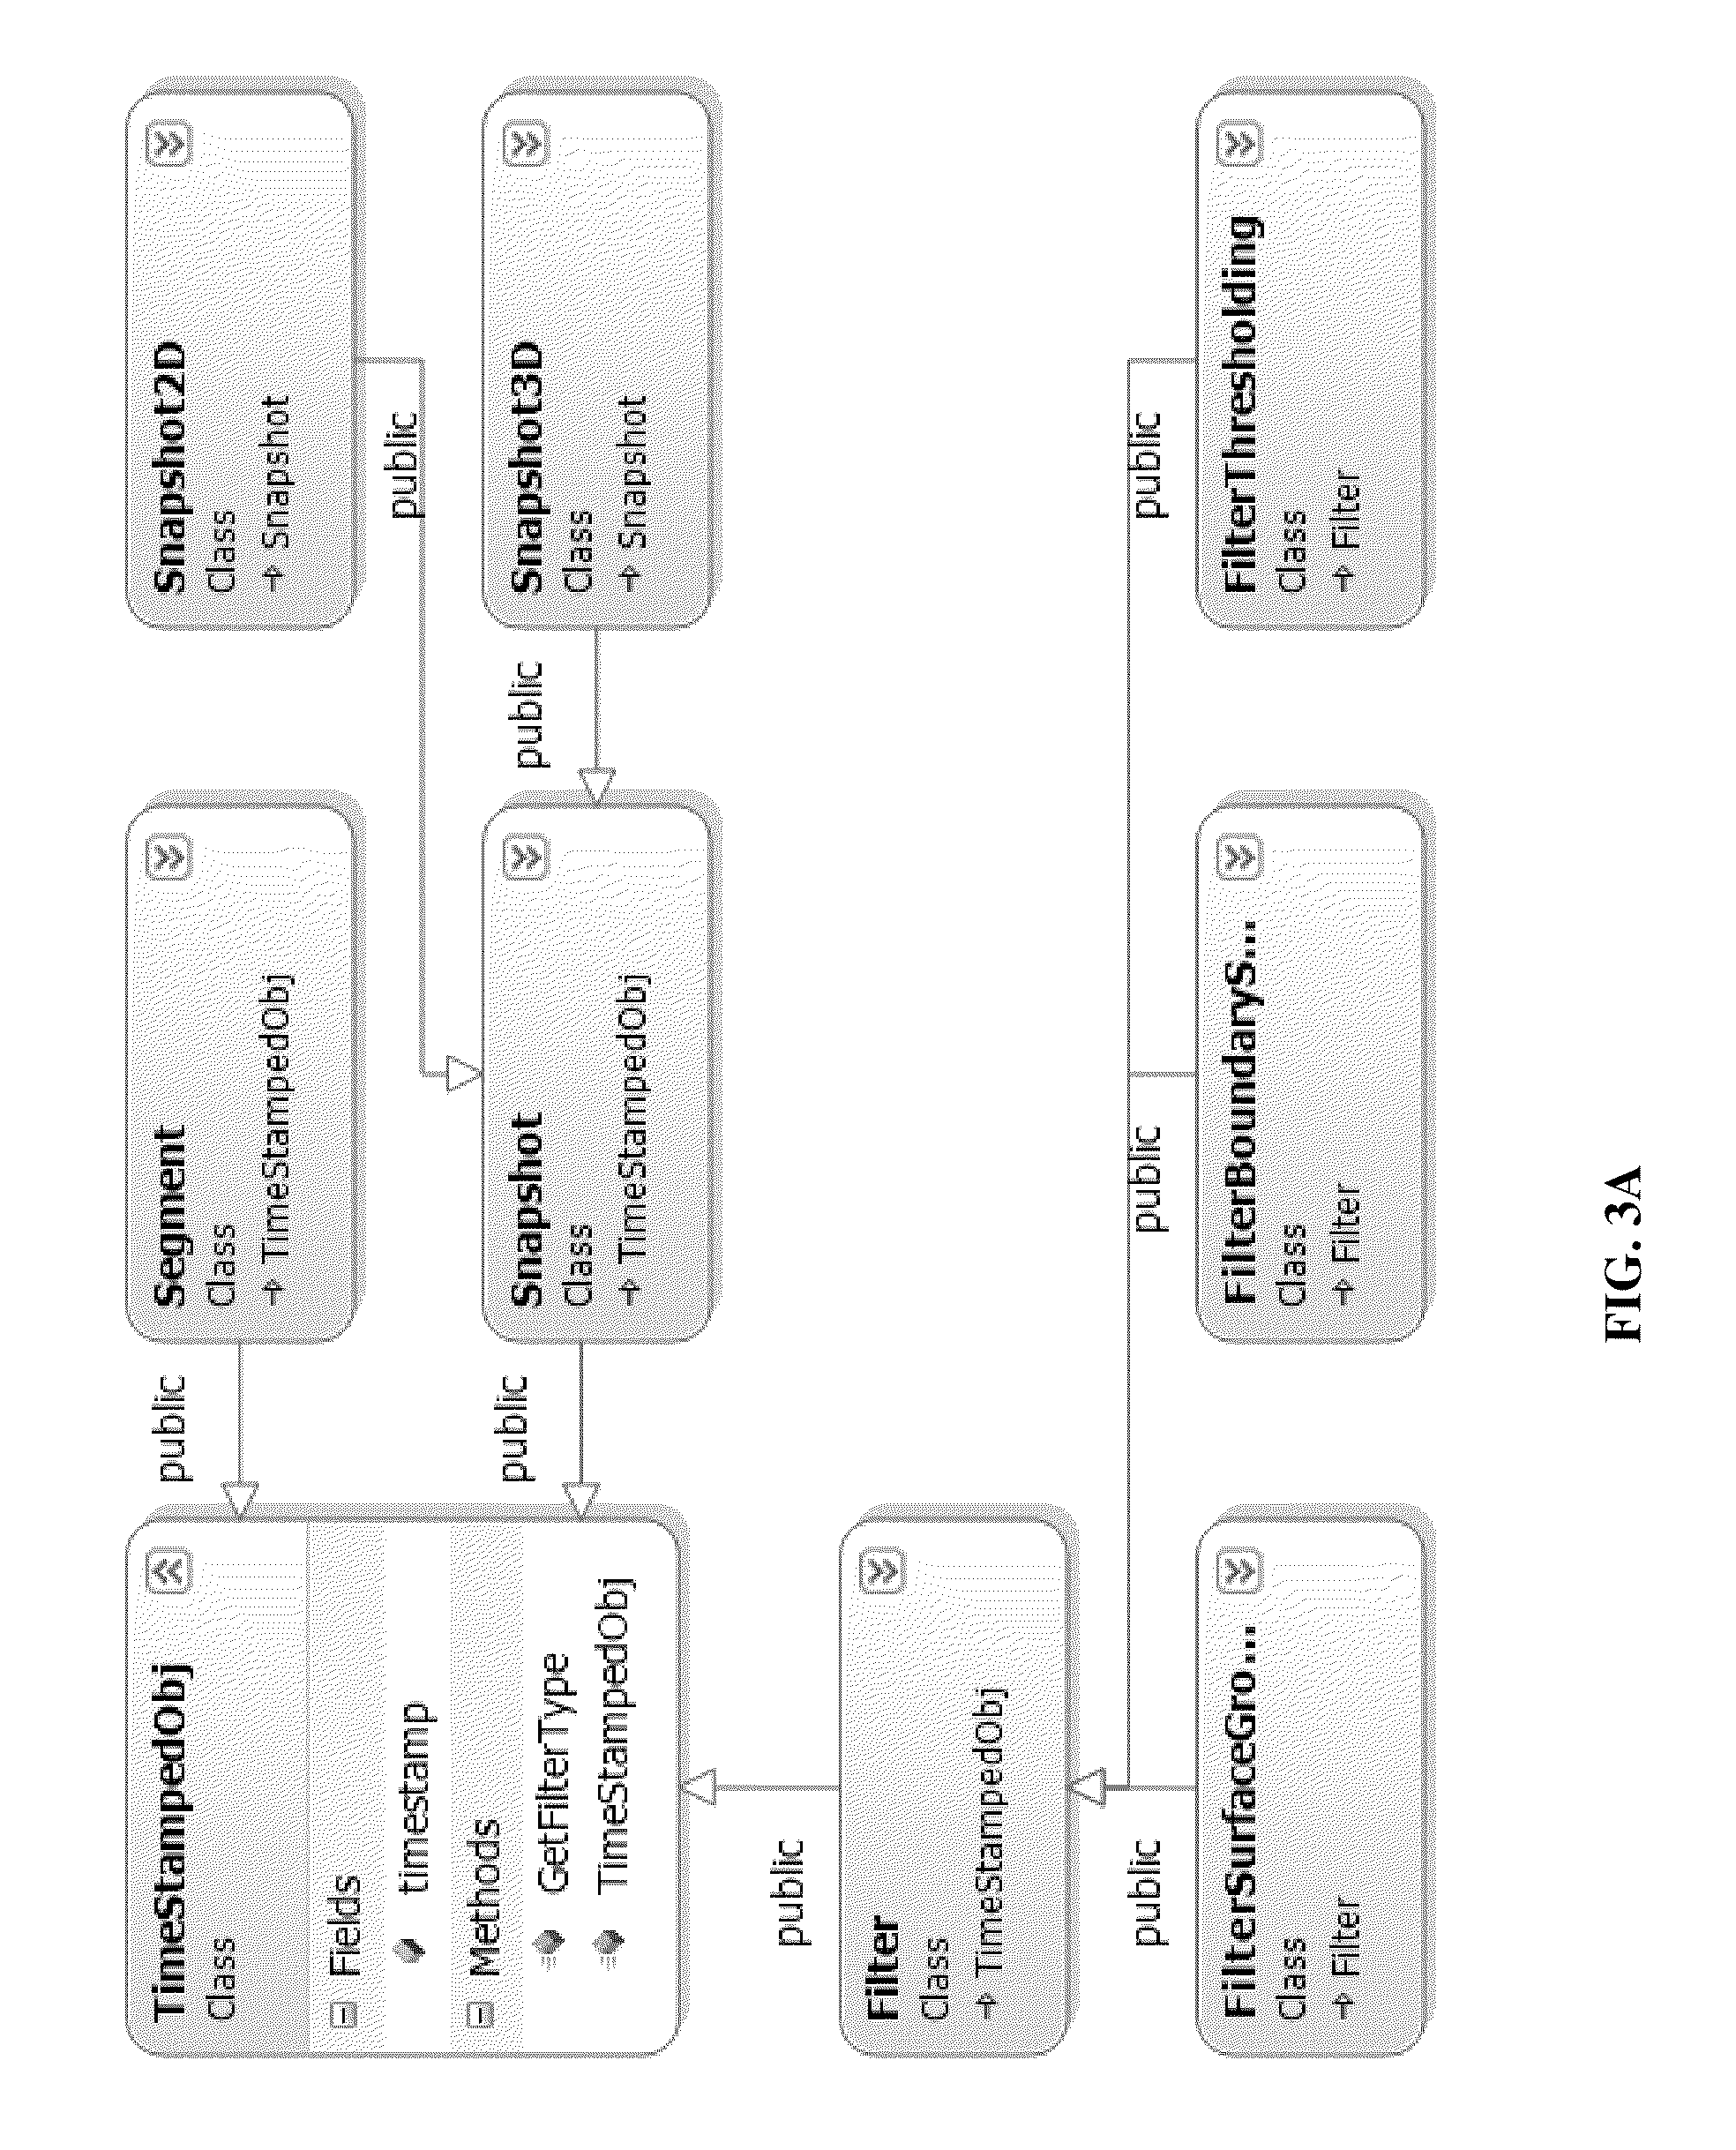 Method and software system for treatment planning and surgical guide cad/cam